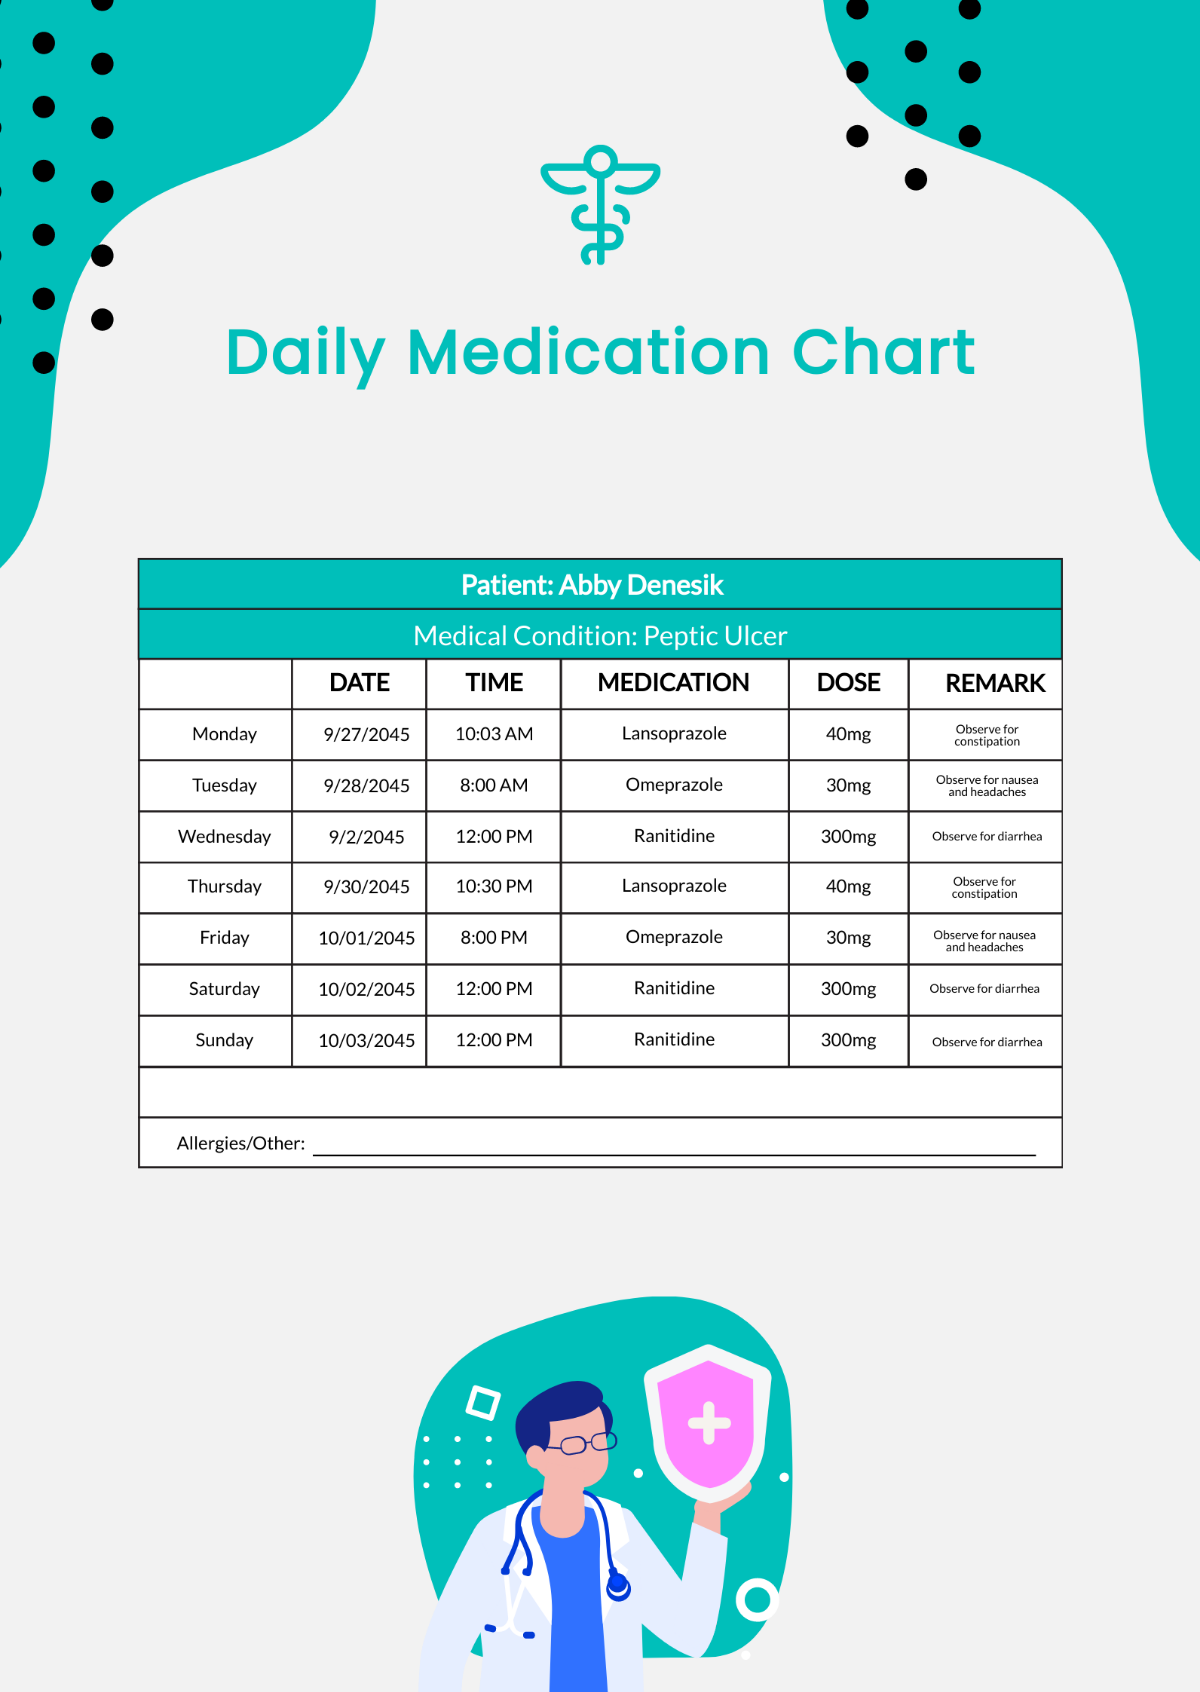 Daily Medication Chart Template